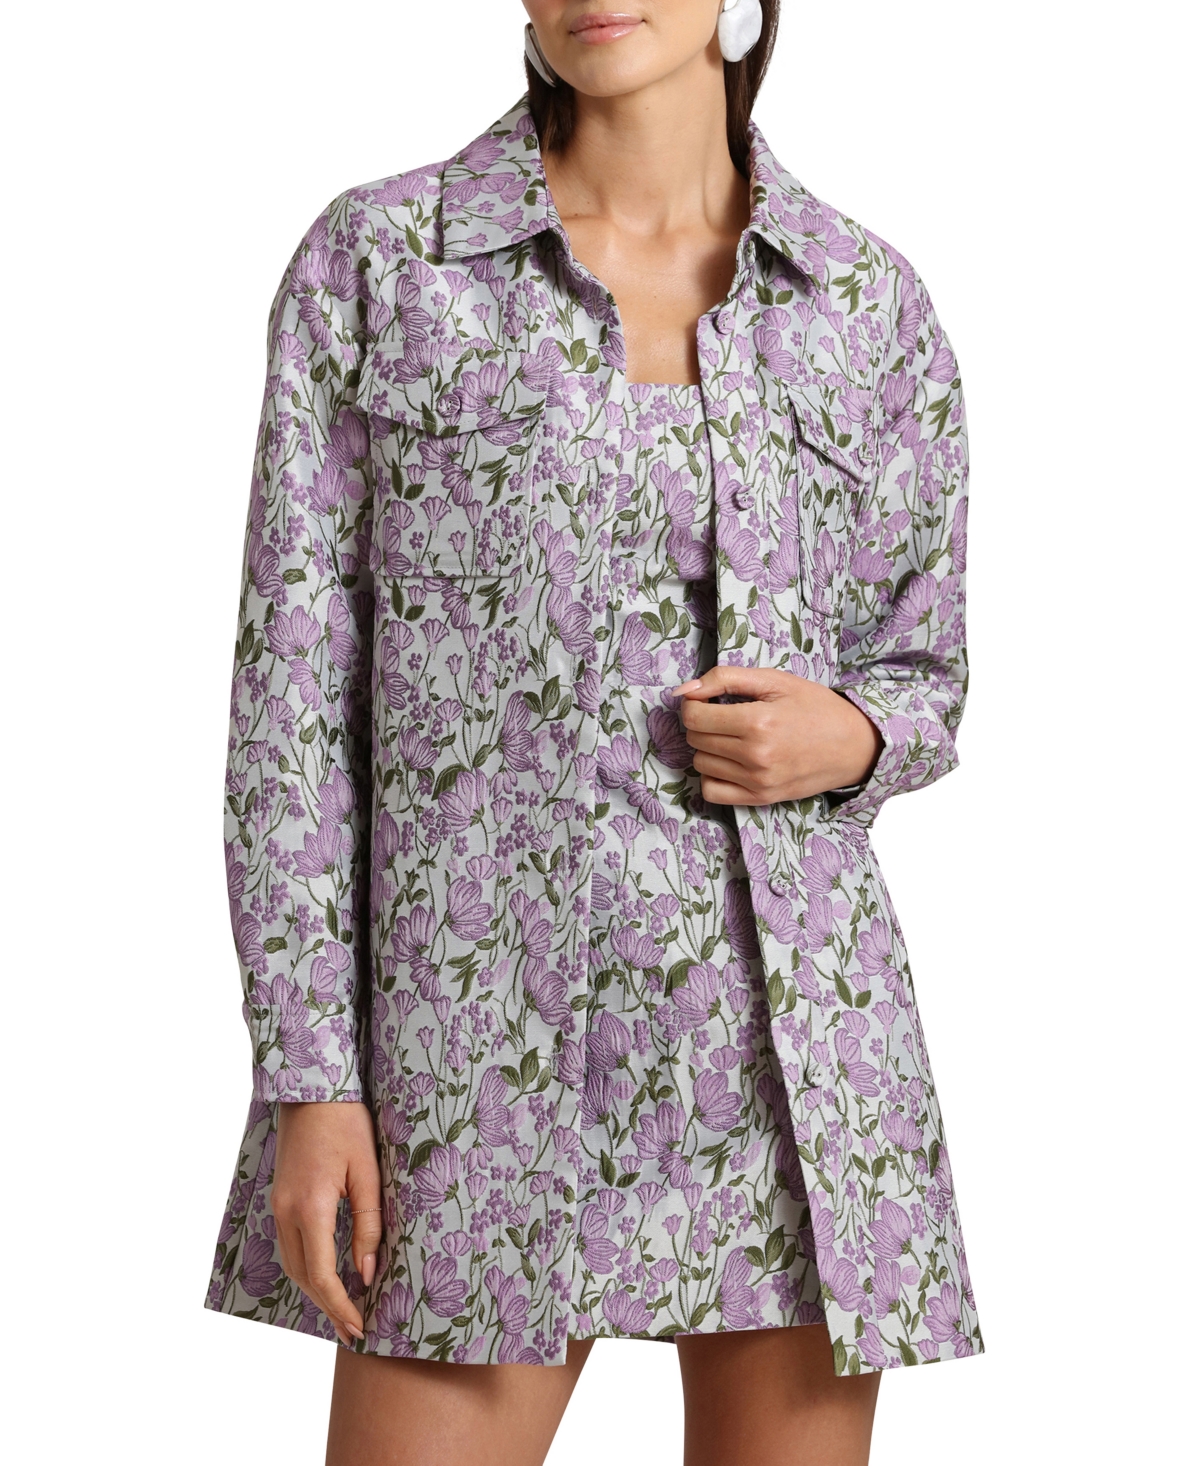 Women's Brocade Meet And Greet Jacket - Ivory/lilac Floral